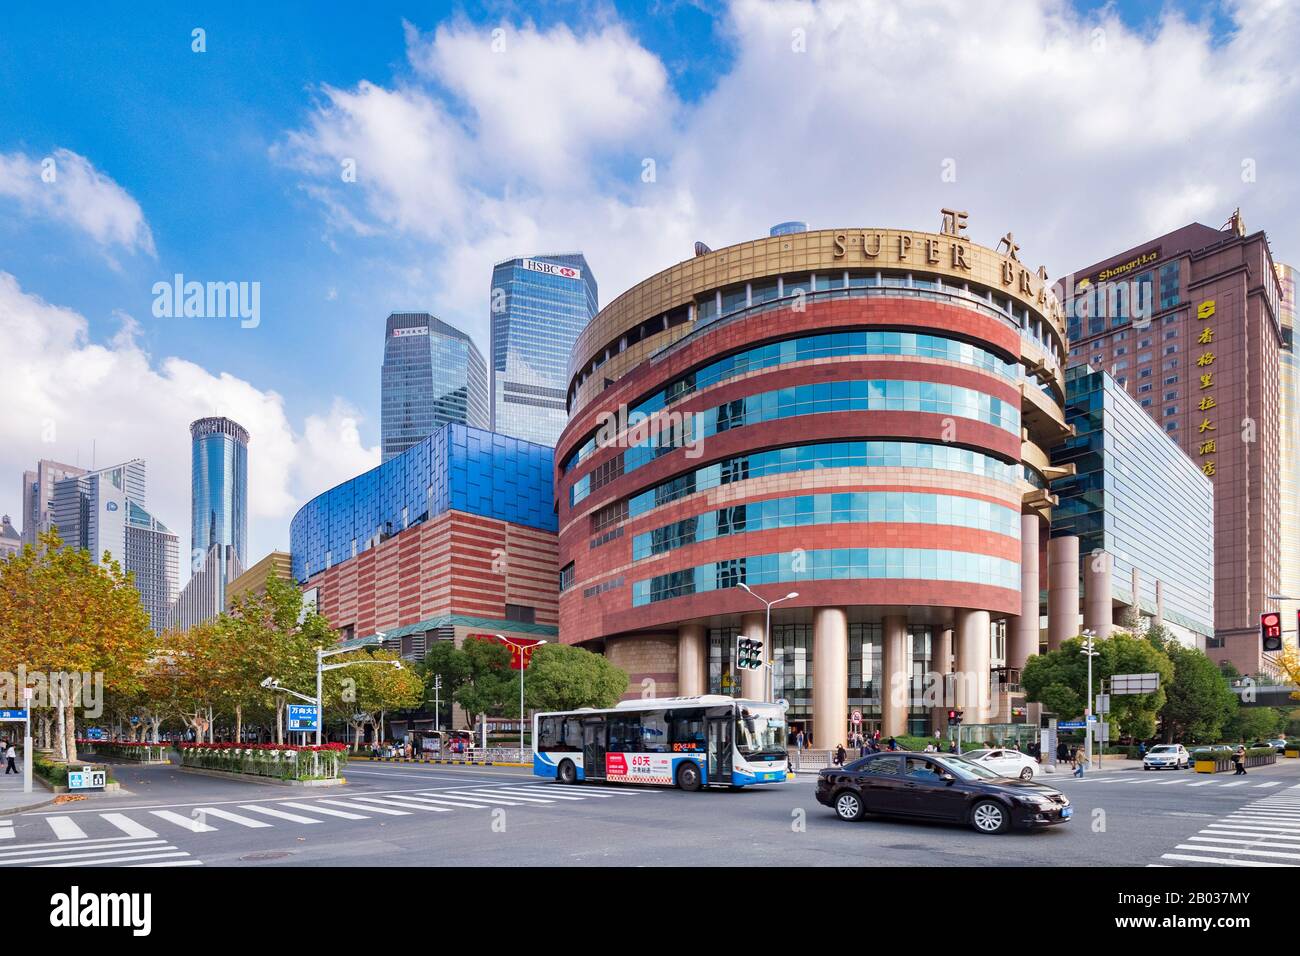 1 December 2018: Shanghai, China - Super Brand Mall, a 13 storey mall amongst the modern highrises of the Pudong district. Stock Photo